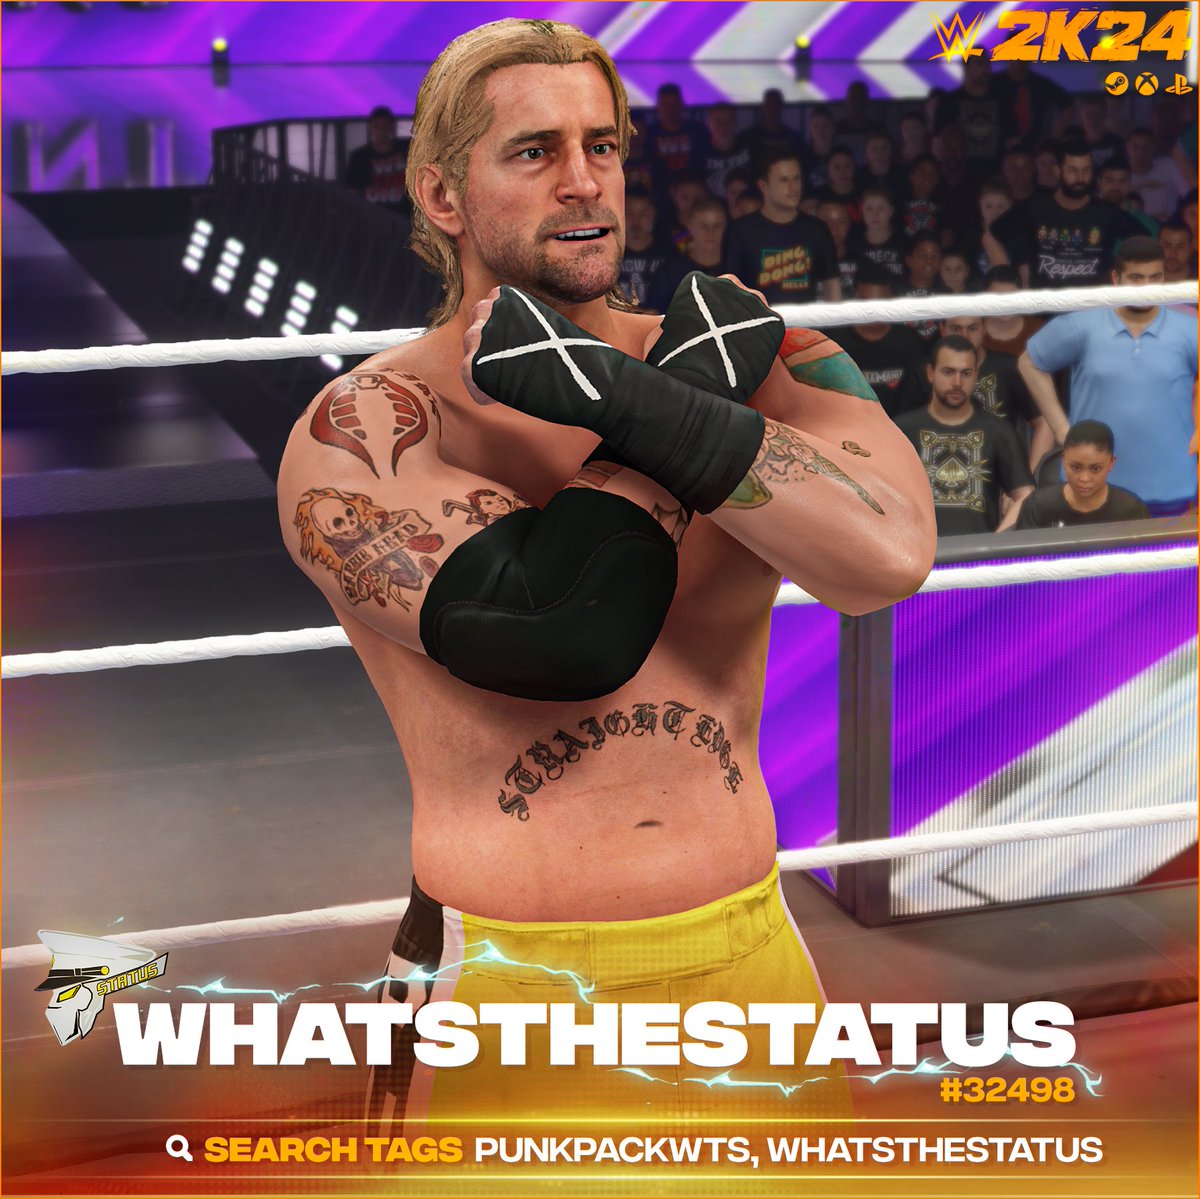 NEW! #WWE2K24 Upload To Community Creations! ★ CM Punk (ROH) (InGame Edit) ★ Search Tag → PUNKPACKWTS or WhatsTheStatus ★ Collaboration → @hamptonhunter97 ★ Support Me → linktr.ee/WhatsTheStatus ★ INCLUDES ● Custom Portrait ● New Hair ● New Beard ● Fixed Tattoos ●